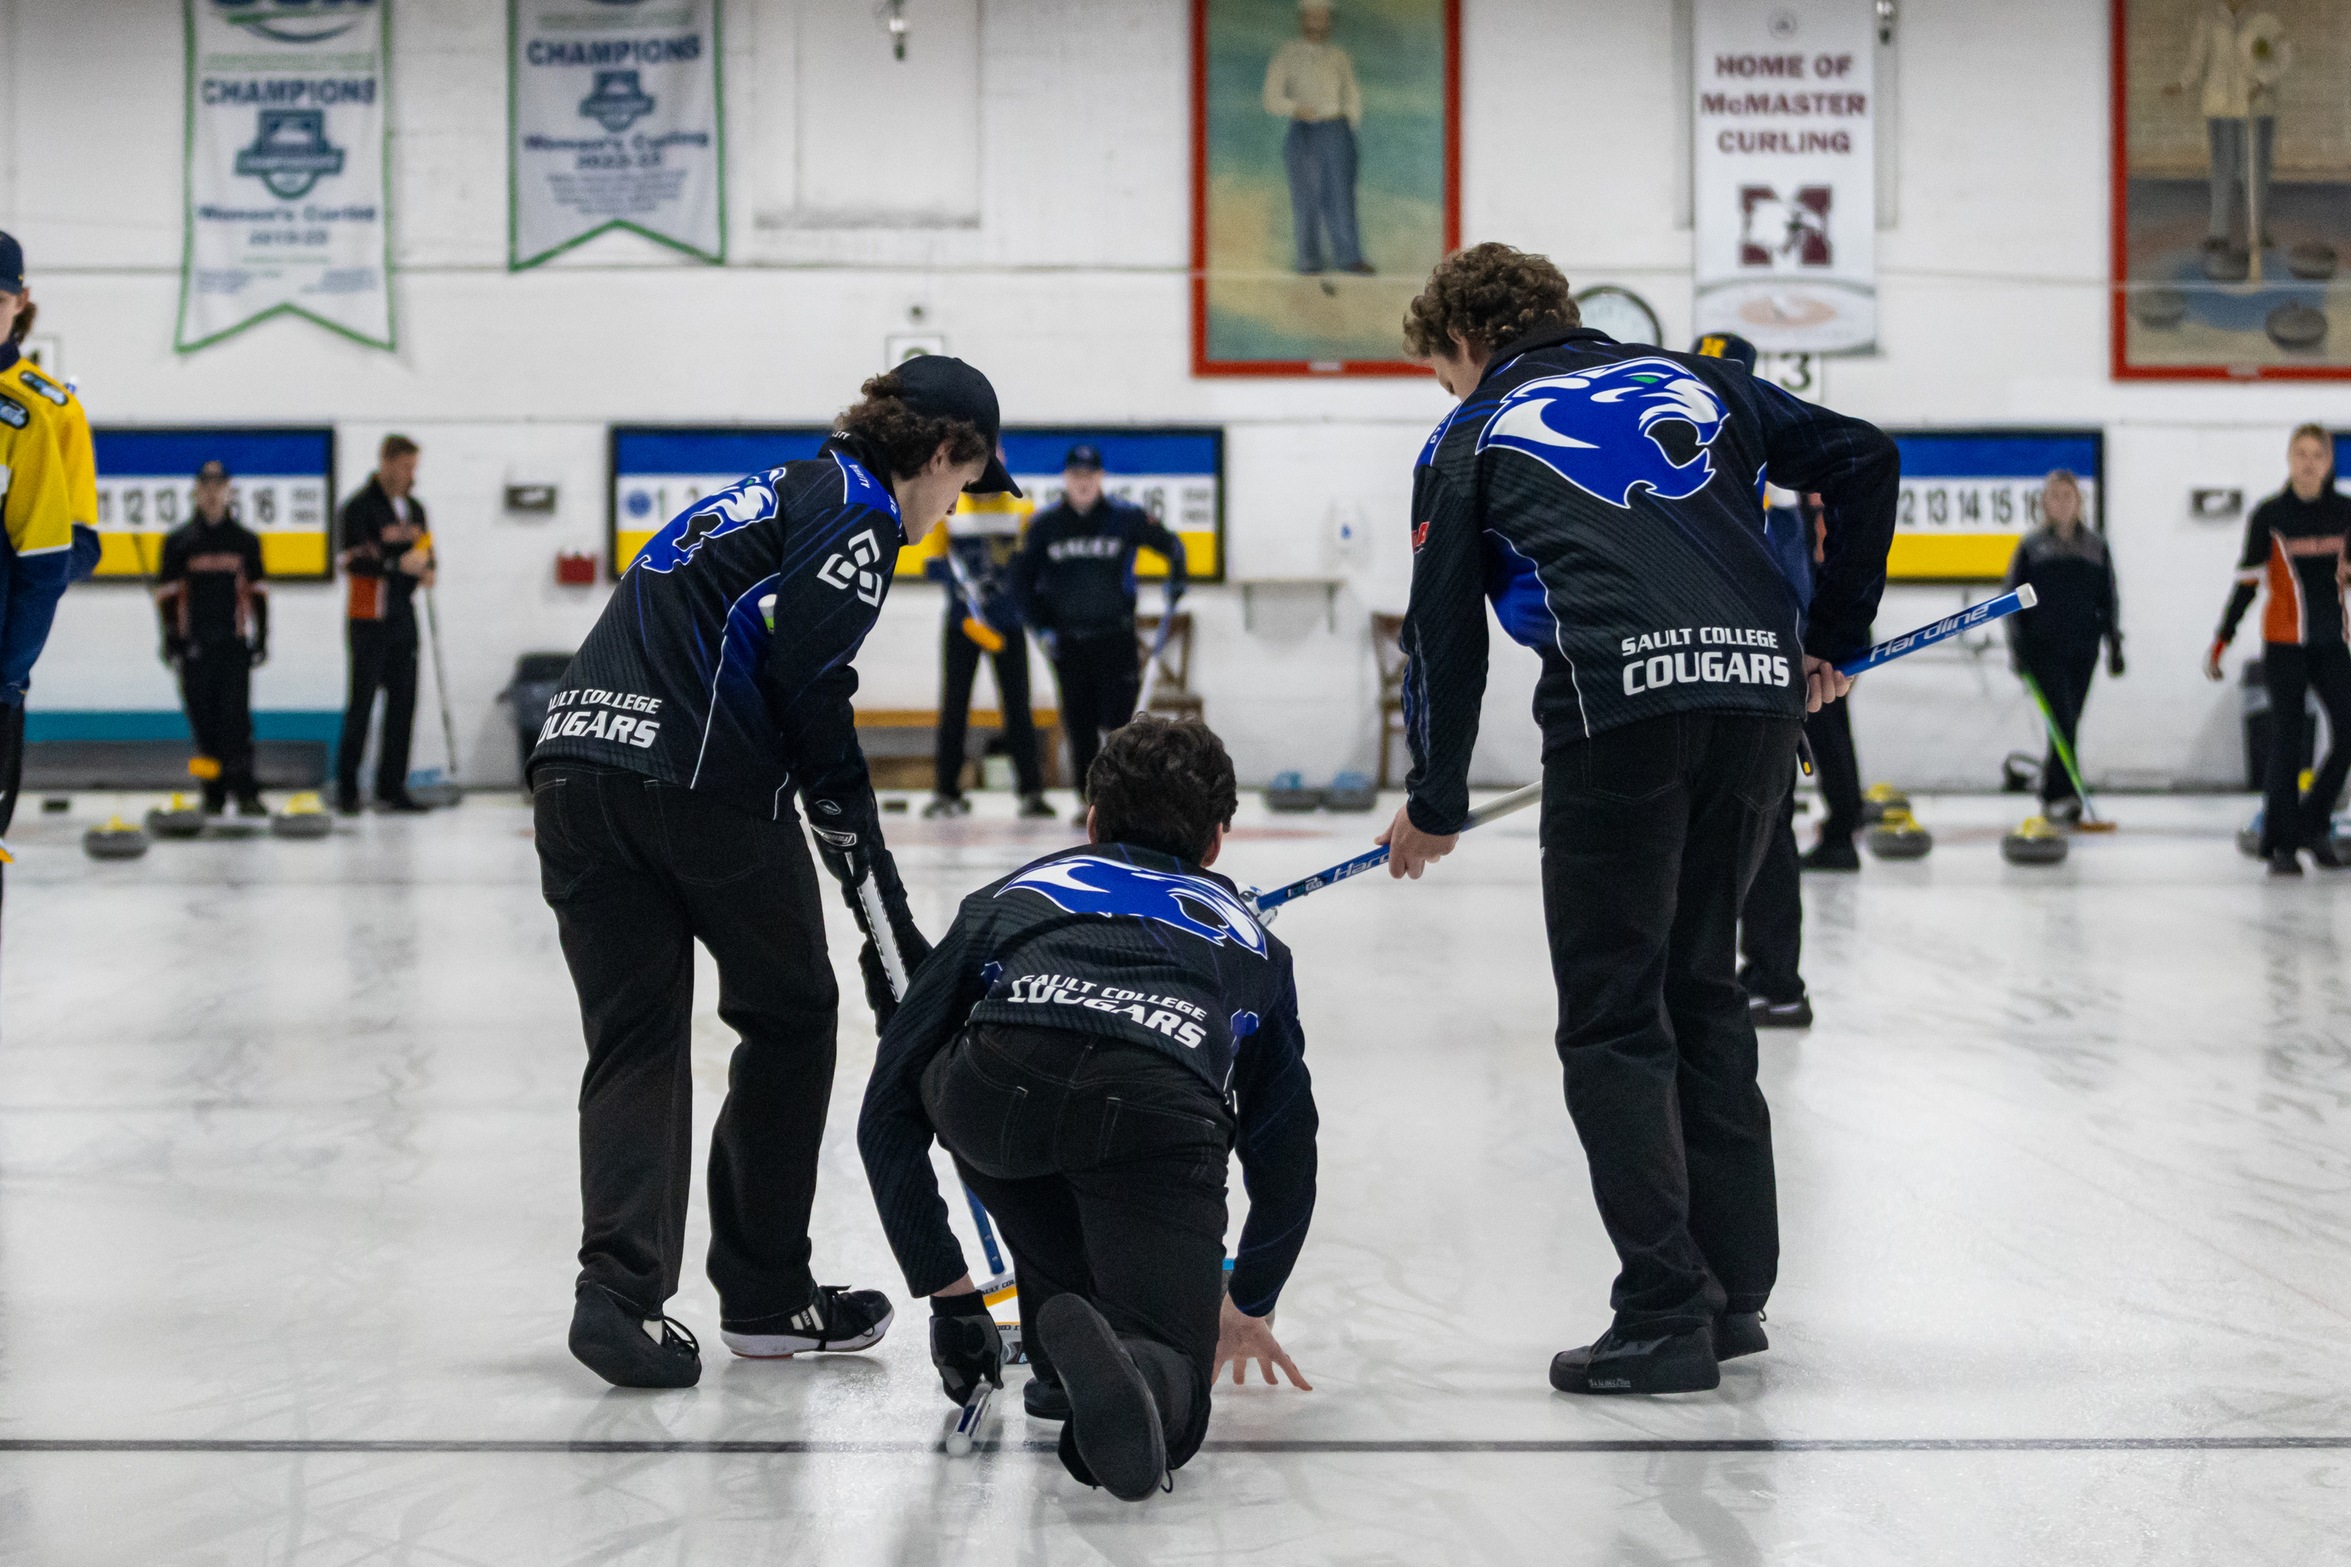 Sault College Curling in the middle of the pack after 2 days of action!